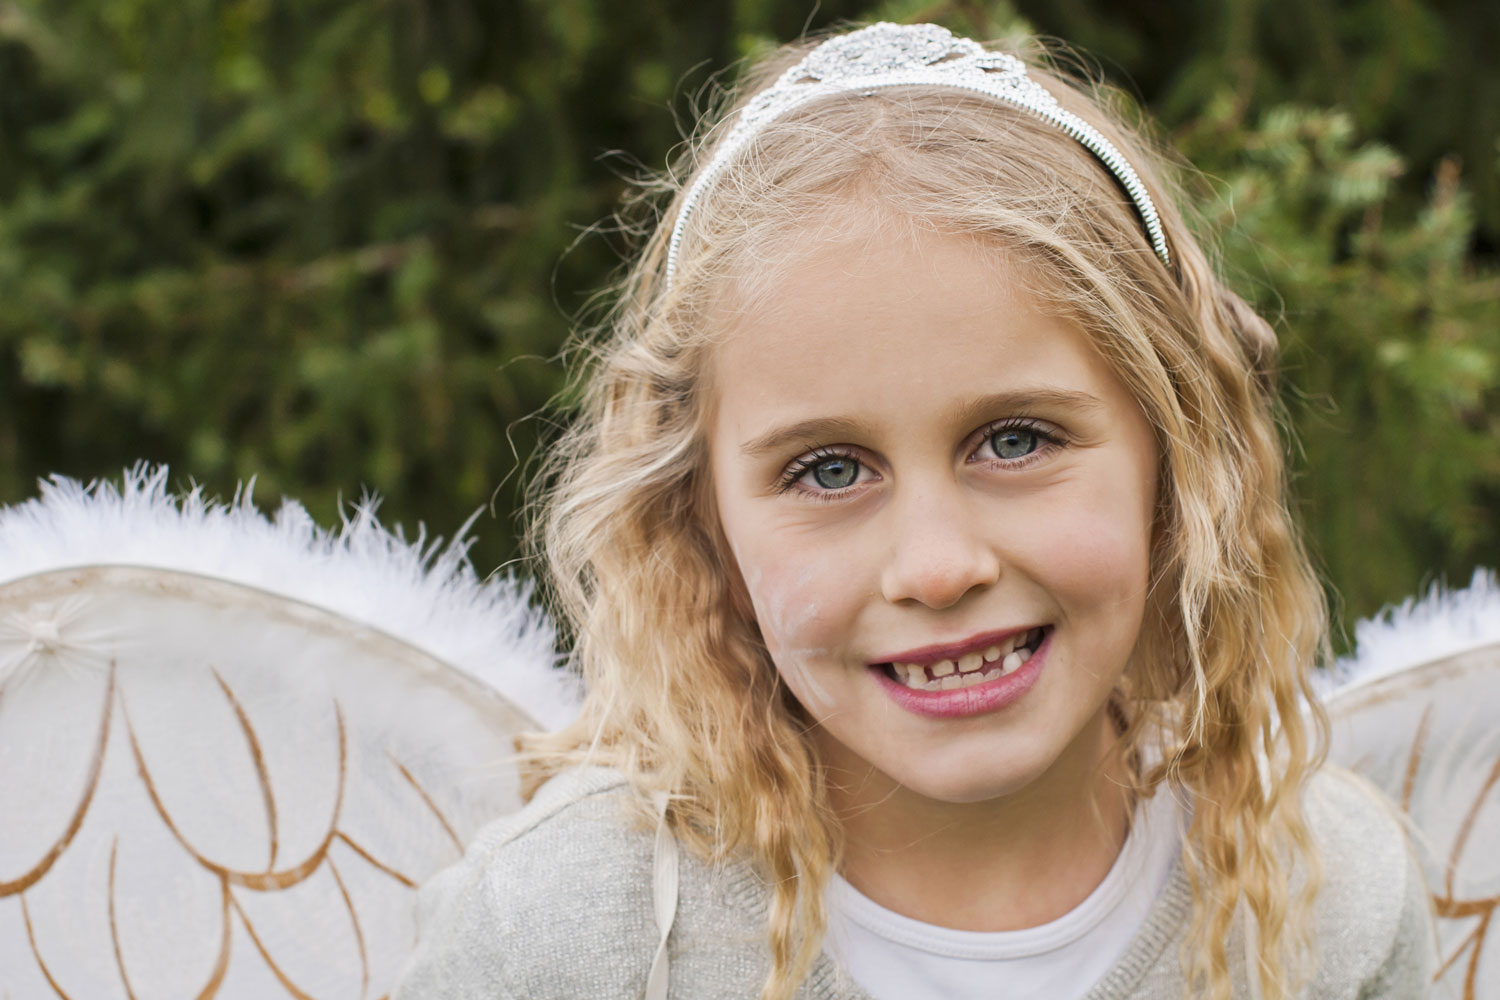 How To Make An Easy DIY Nativity Costume For An Angel